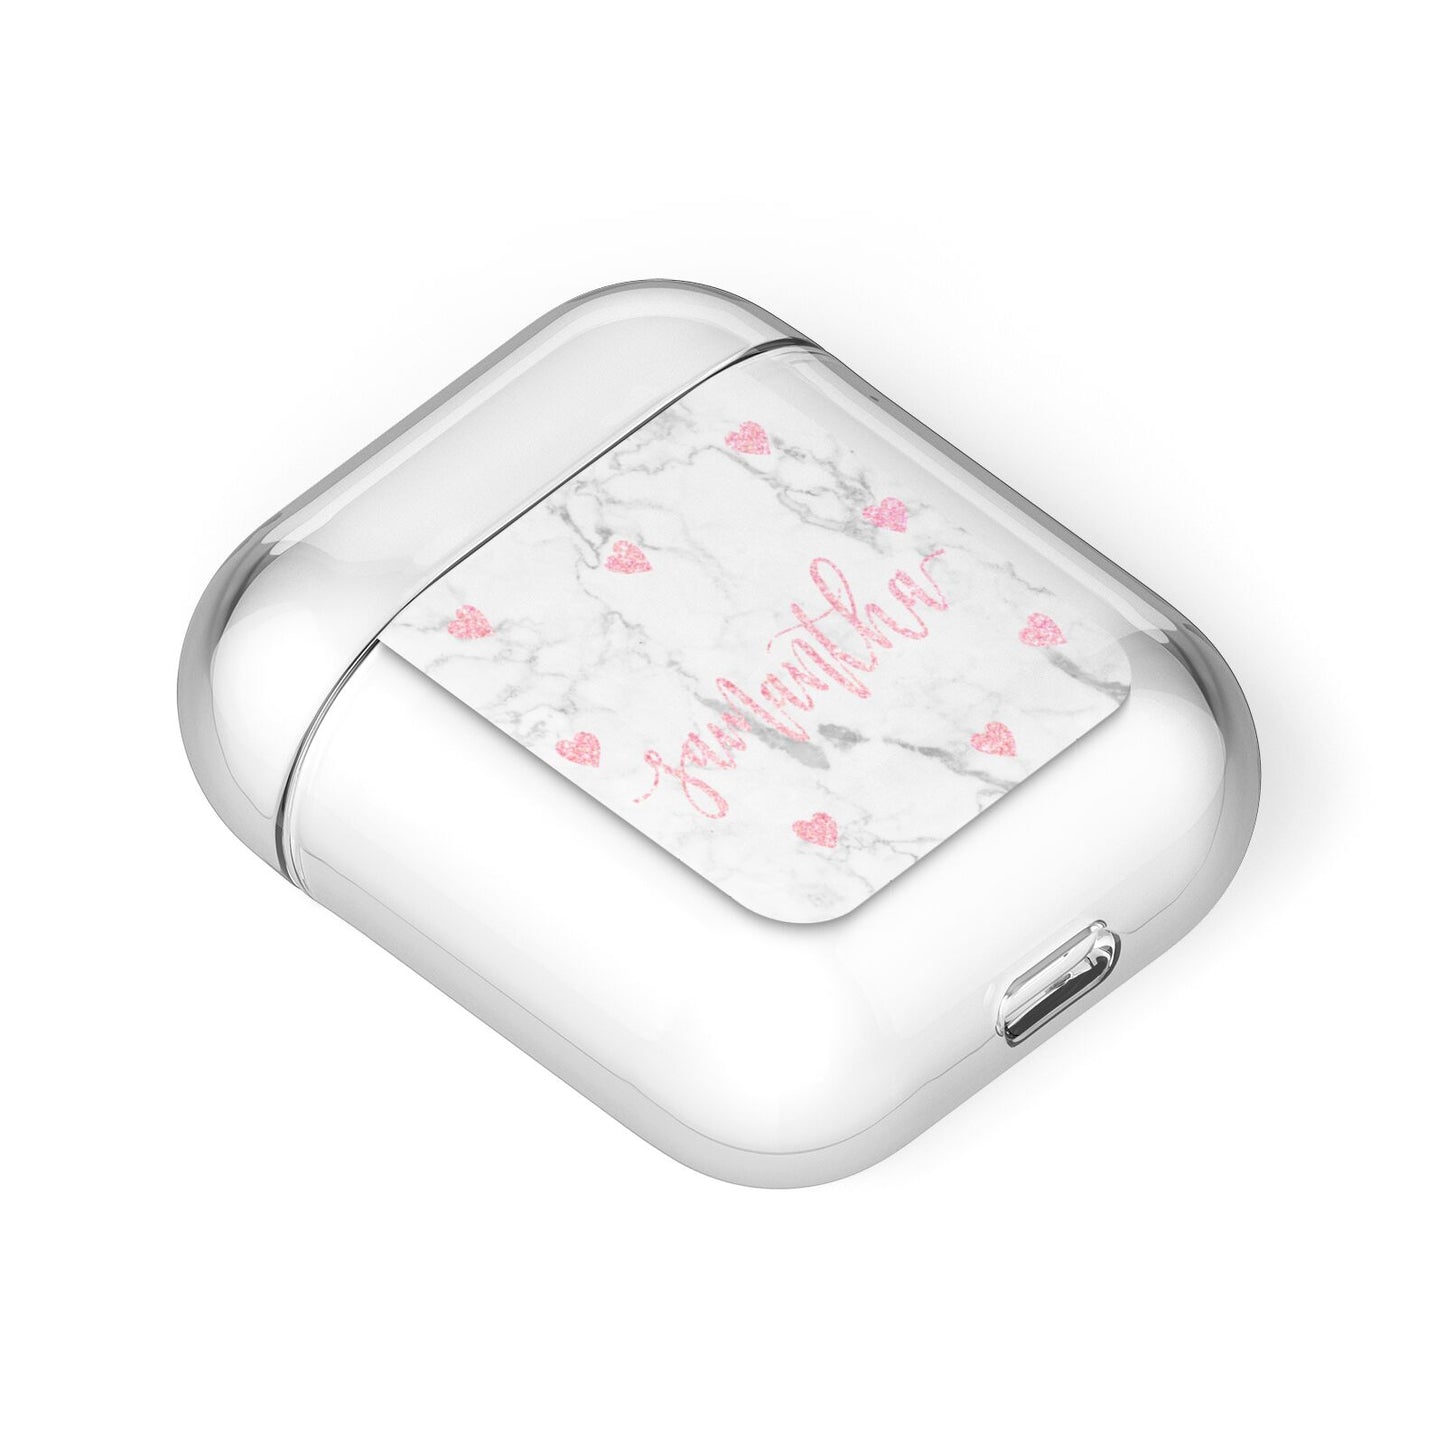 Glitter Hearts Marble Personalised Name AirPods Case Laid Flat